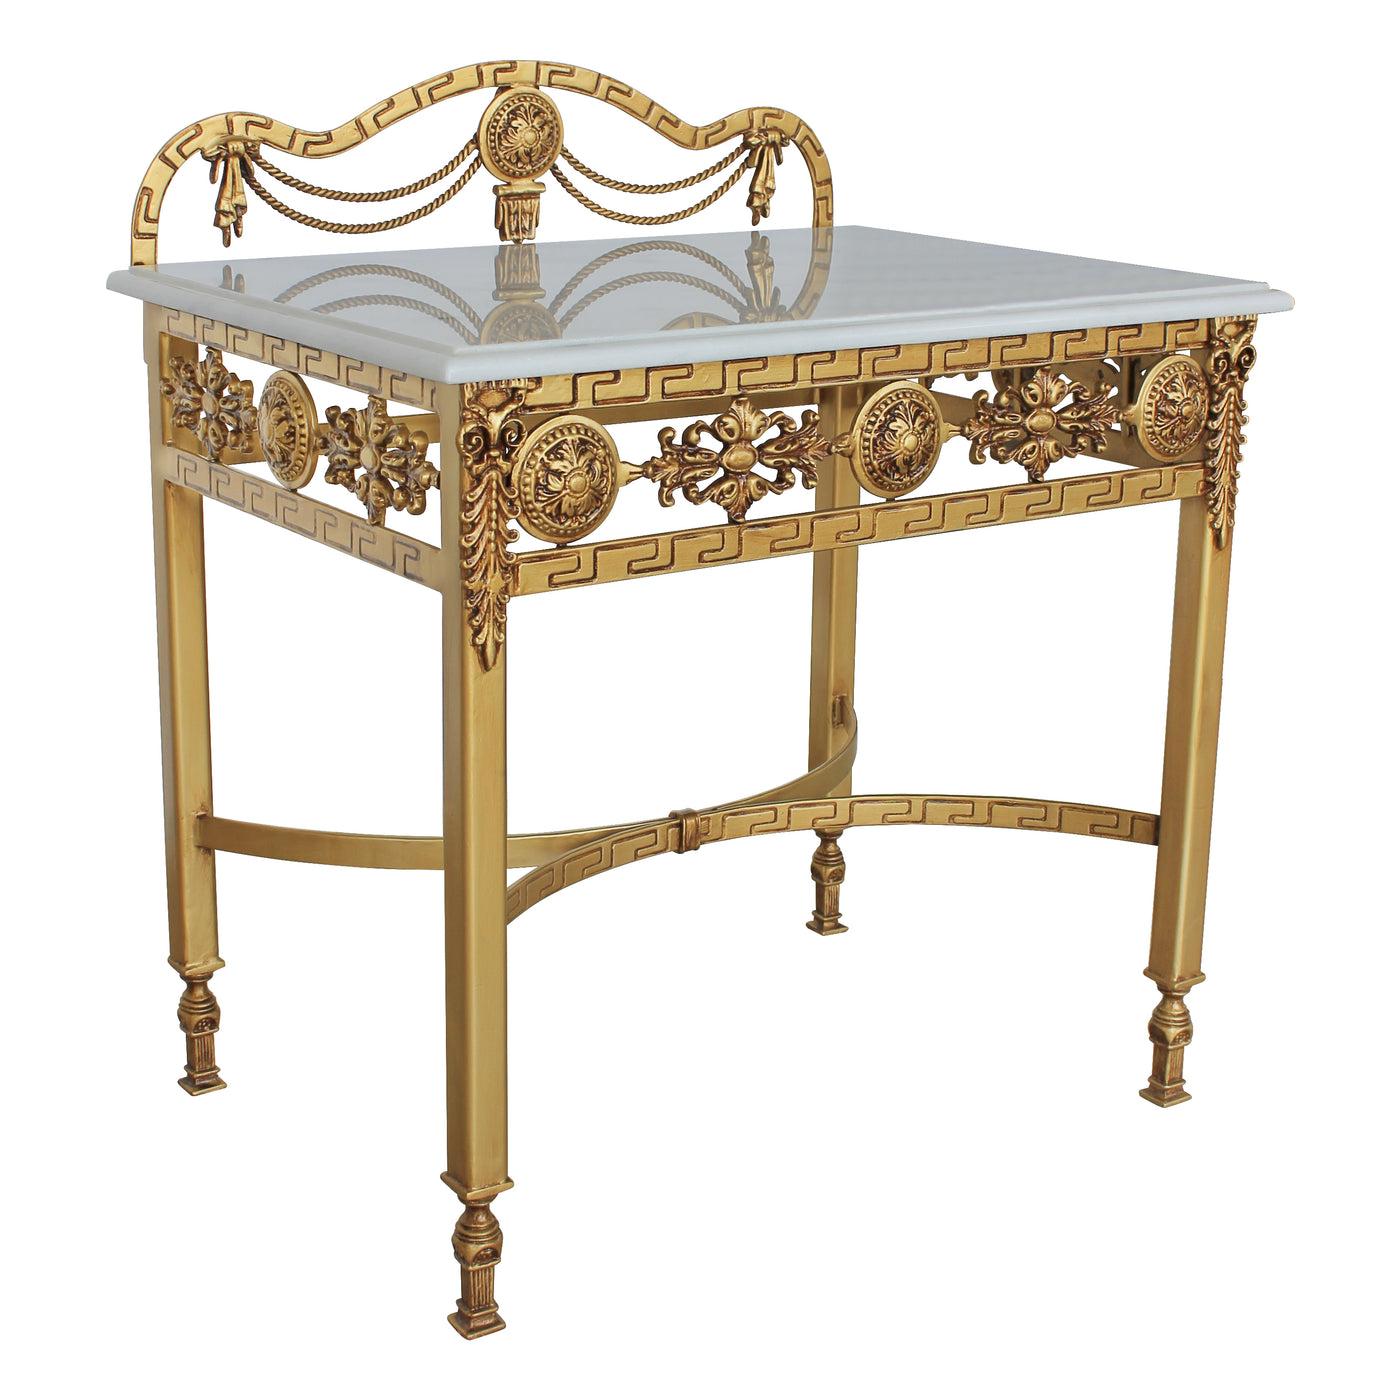 Royal rectangular bedside table with white marble top and antique gold finish